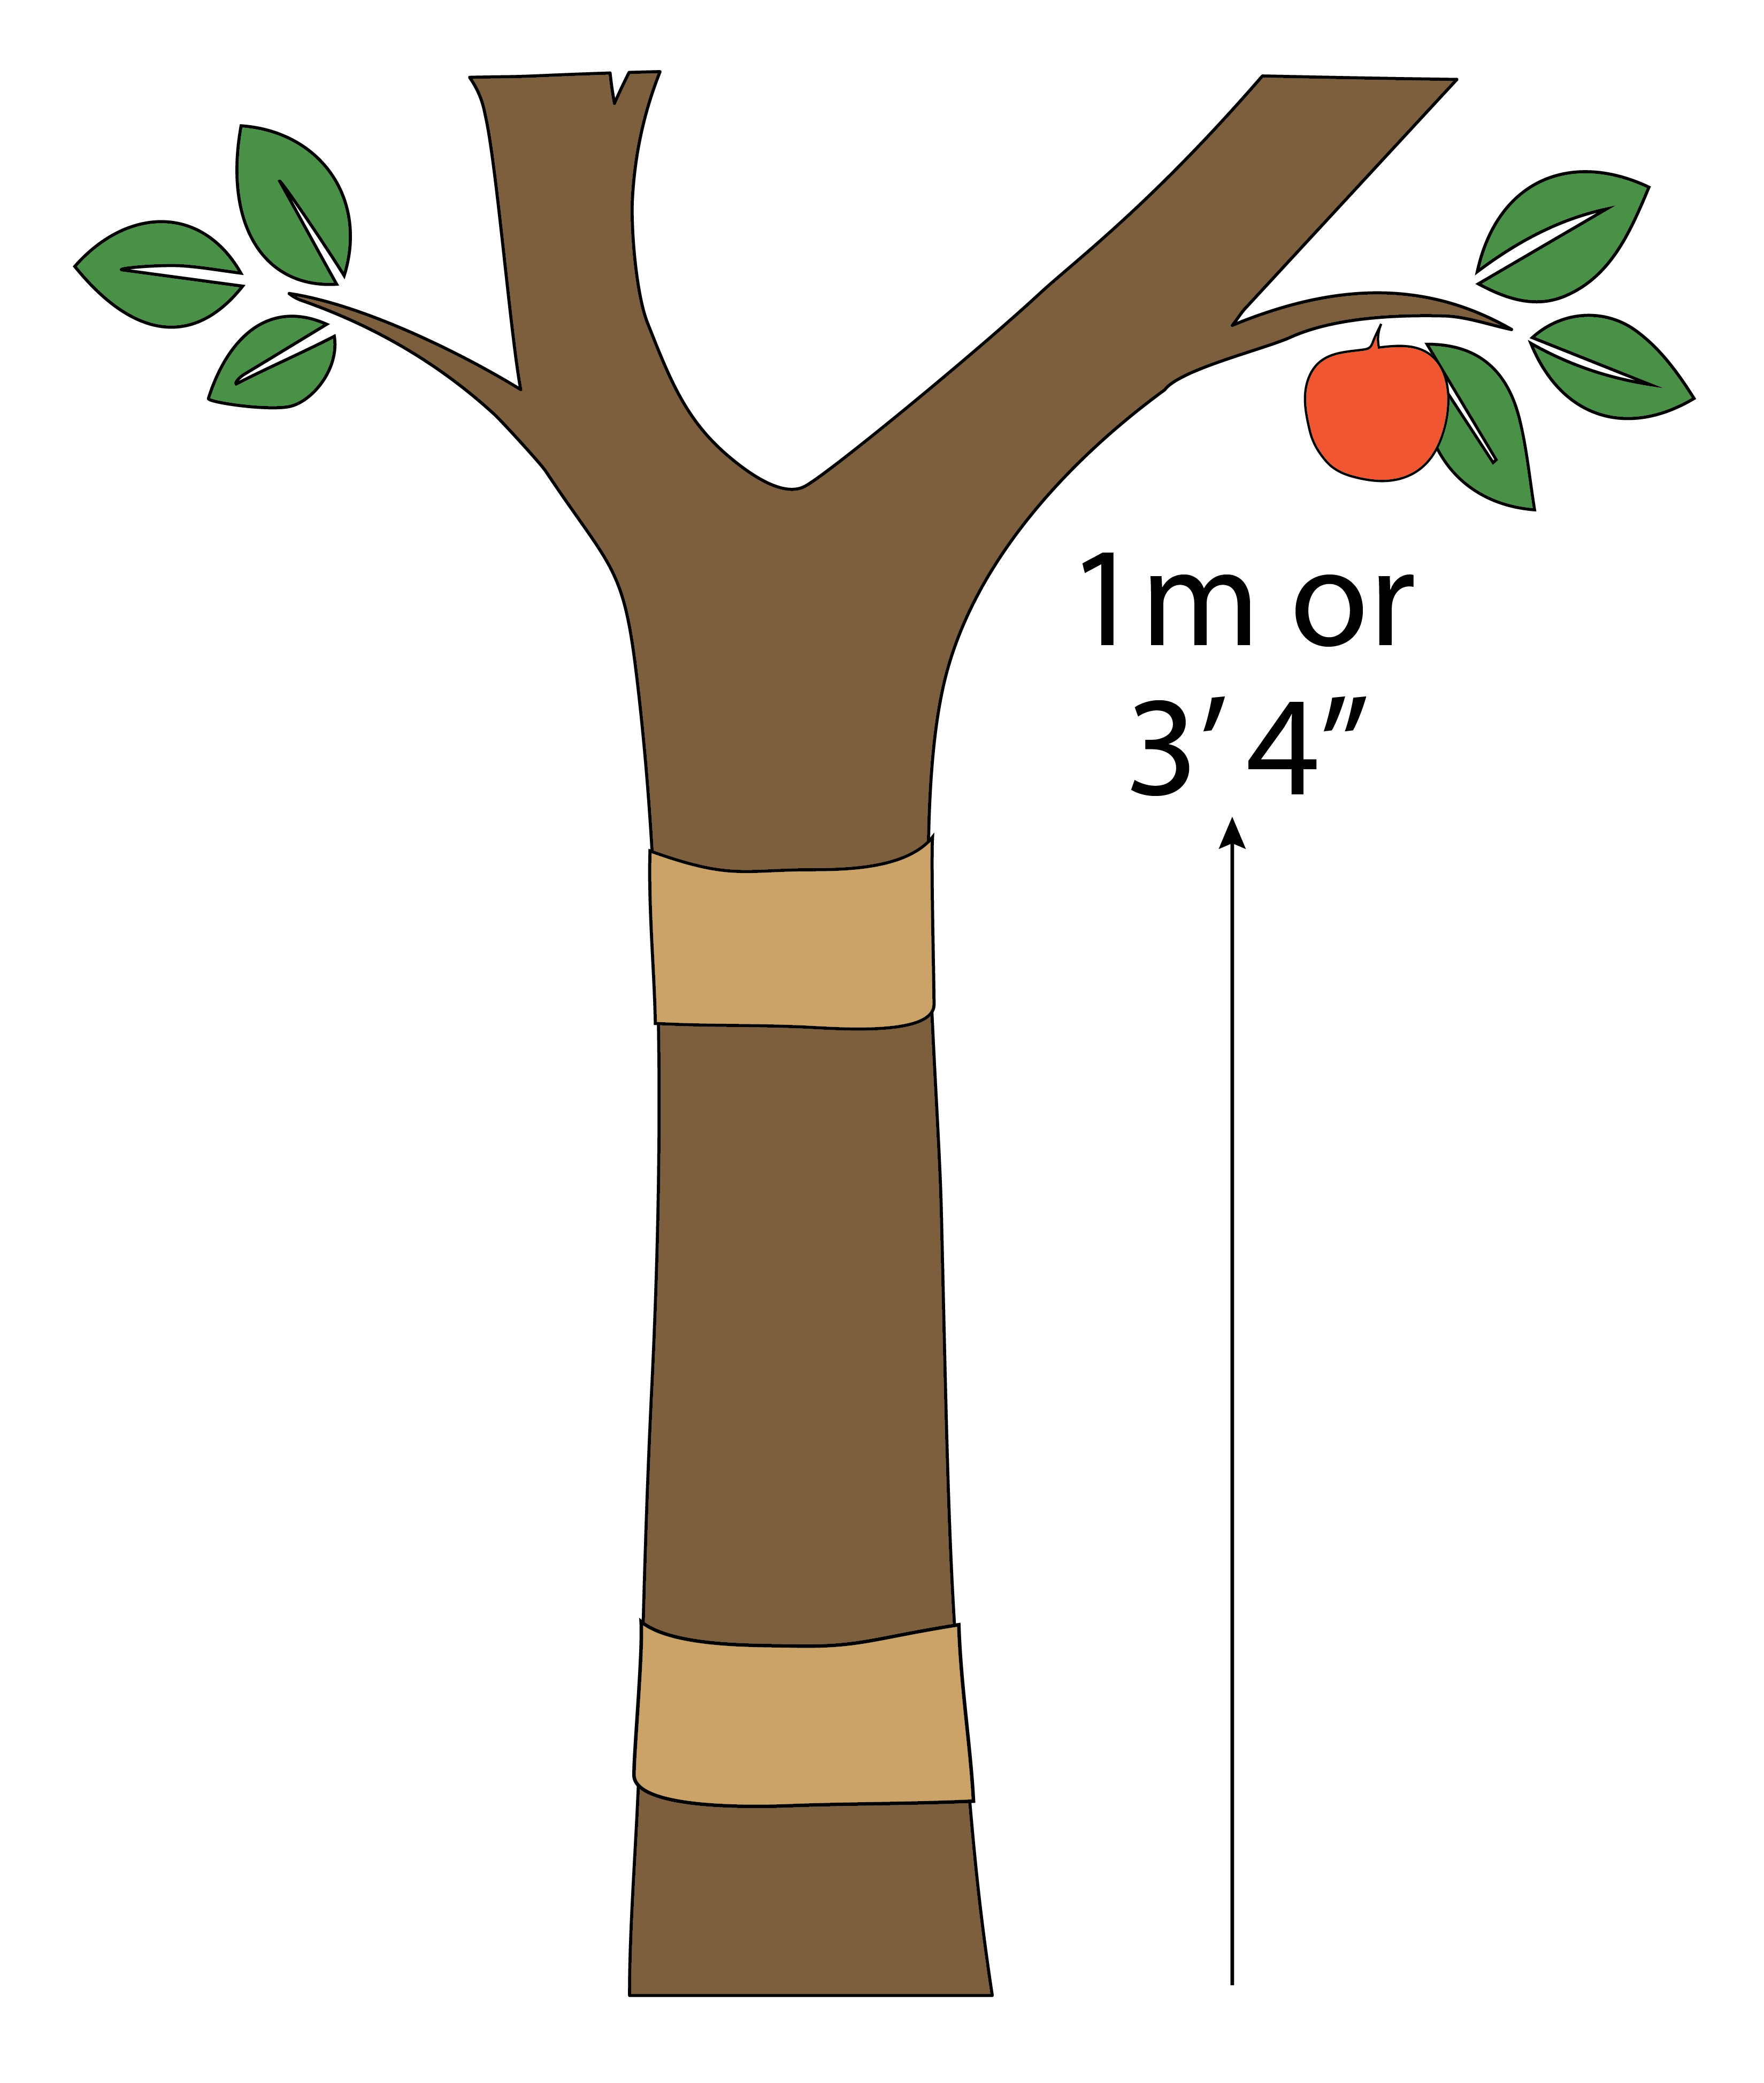 An illustration demonstrating the proper height and spacing for banding on a tree for CM control